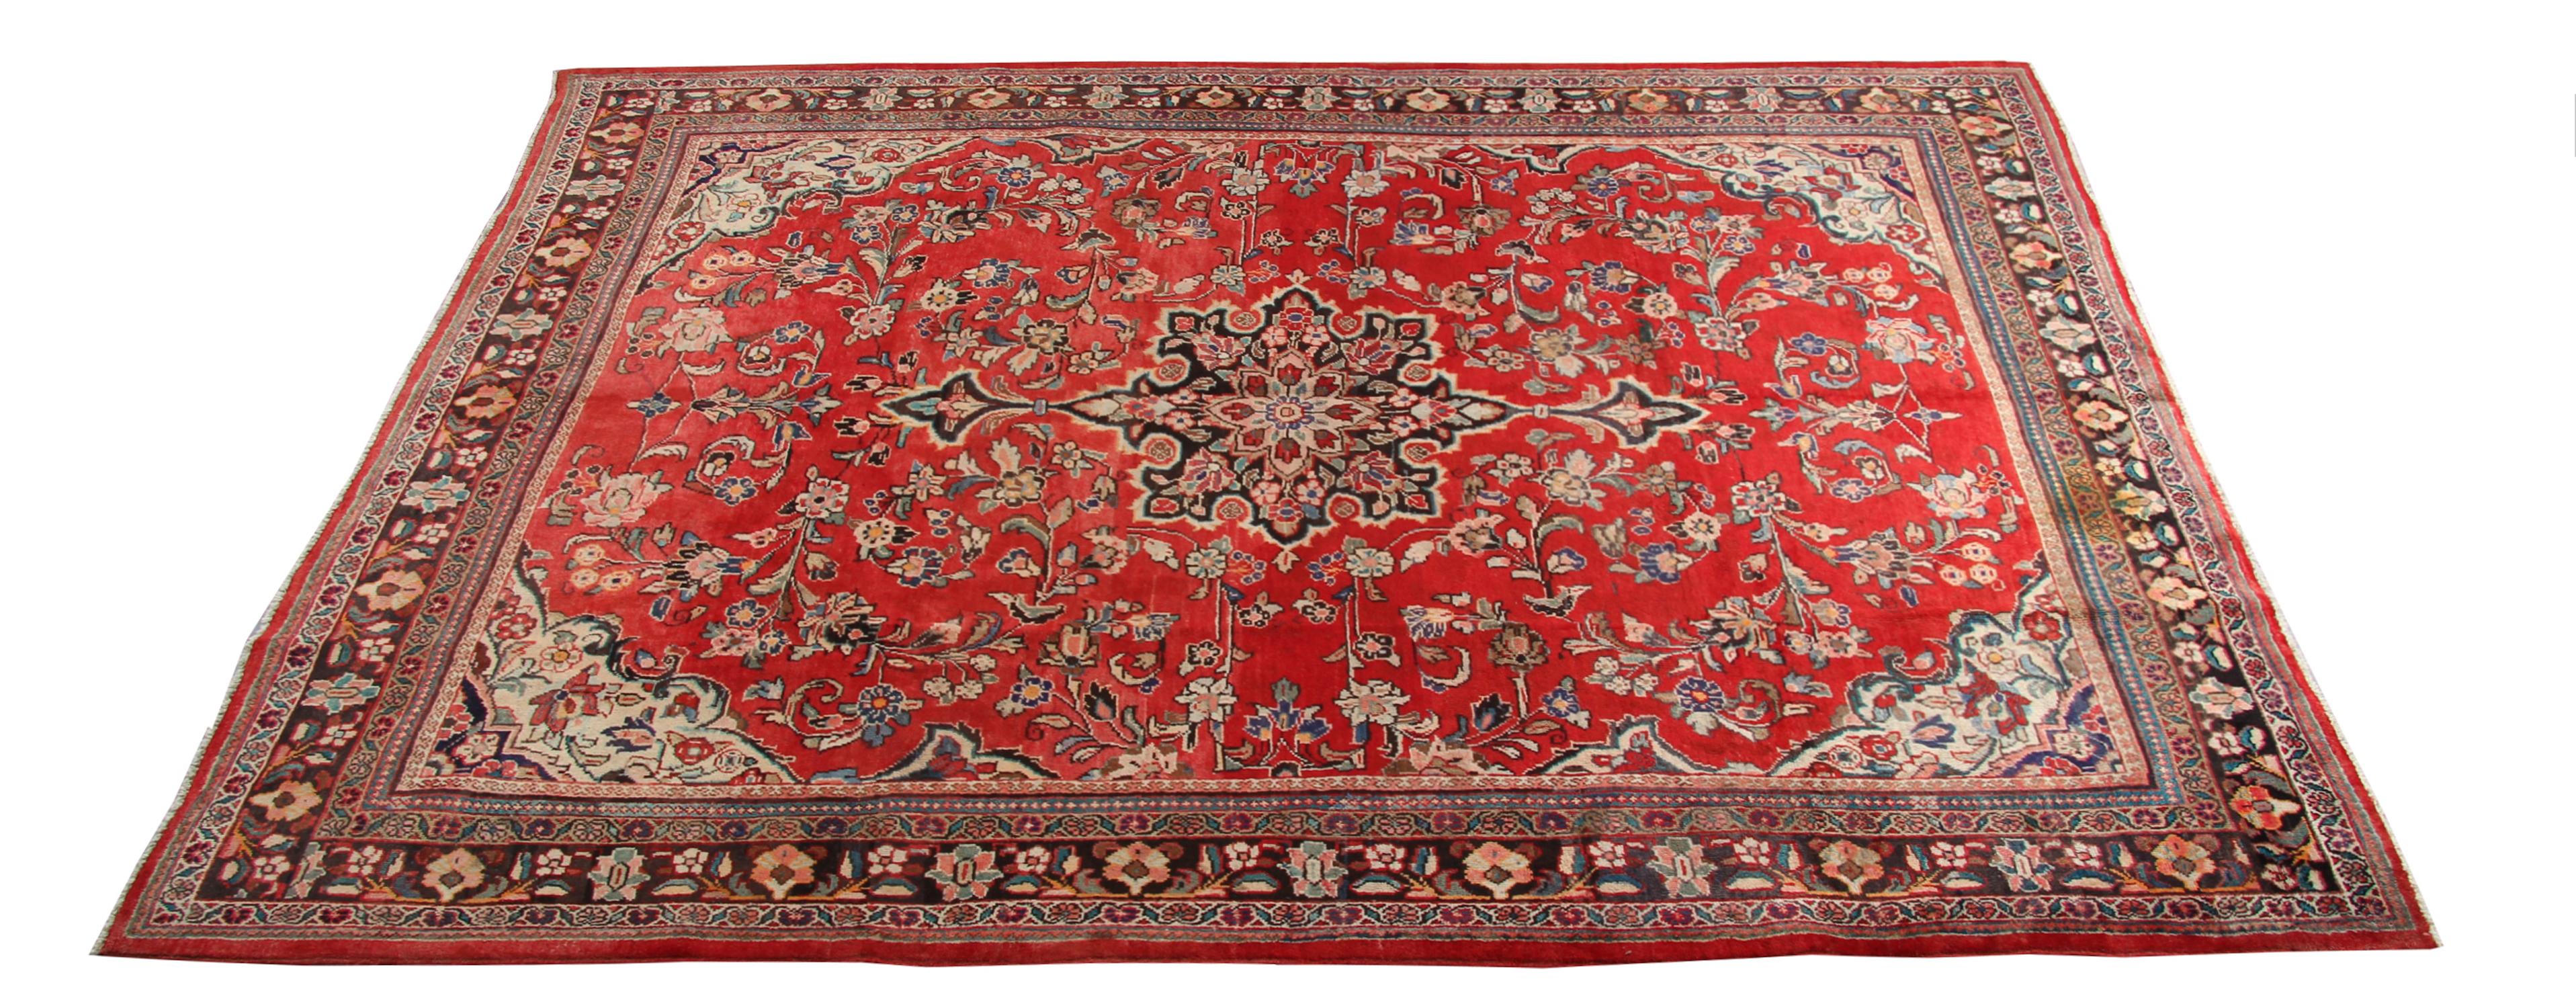 Decorated with a fantastic symmetrical medallion design, adorned with a high level of detail and a fantastic colour pallet including red, blue, rust and cream. This elegant design is sure to uplift any room it’s introduced into. These handmade